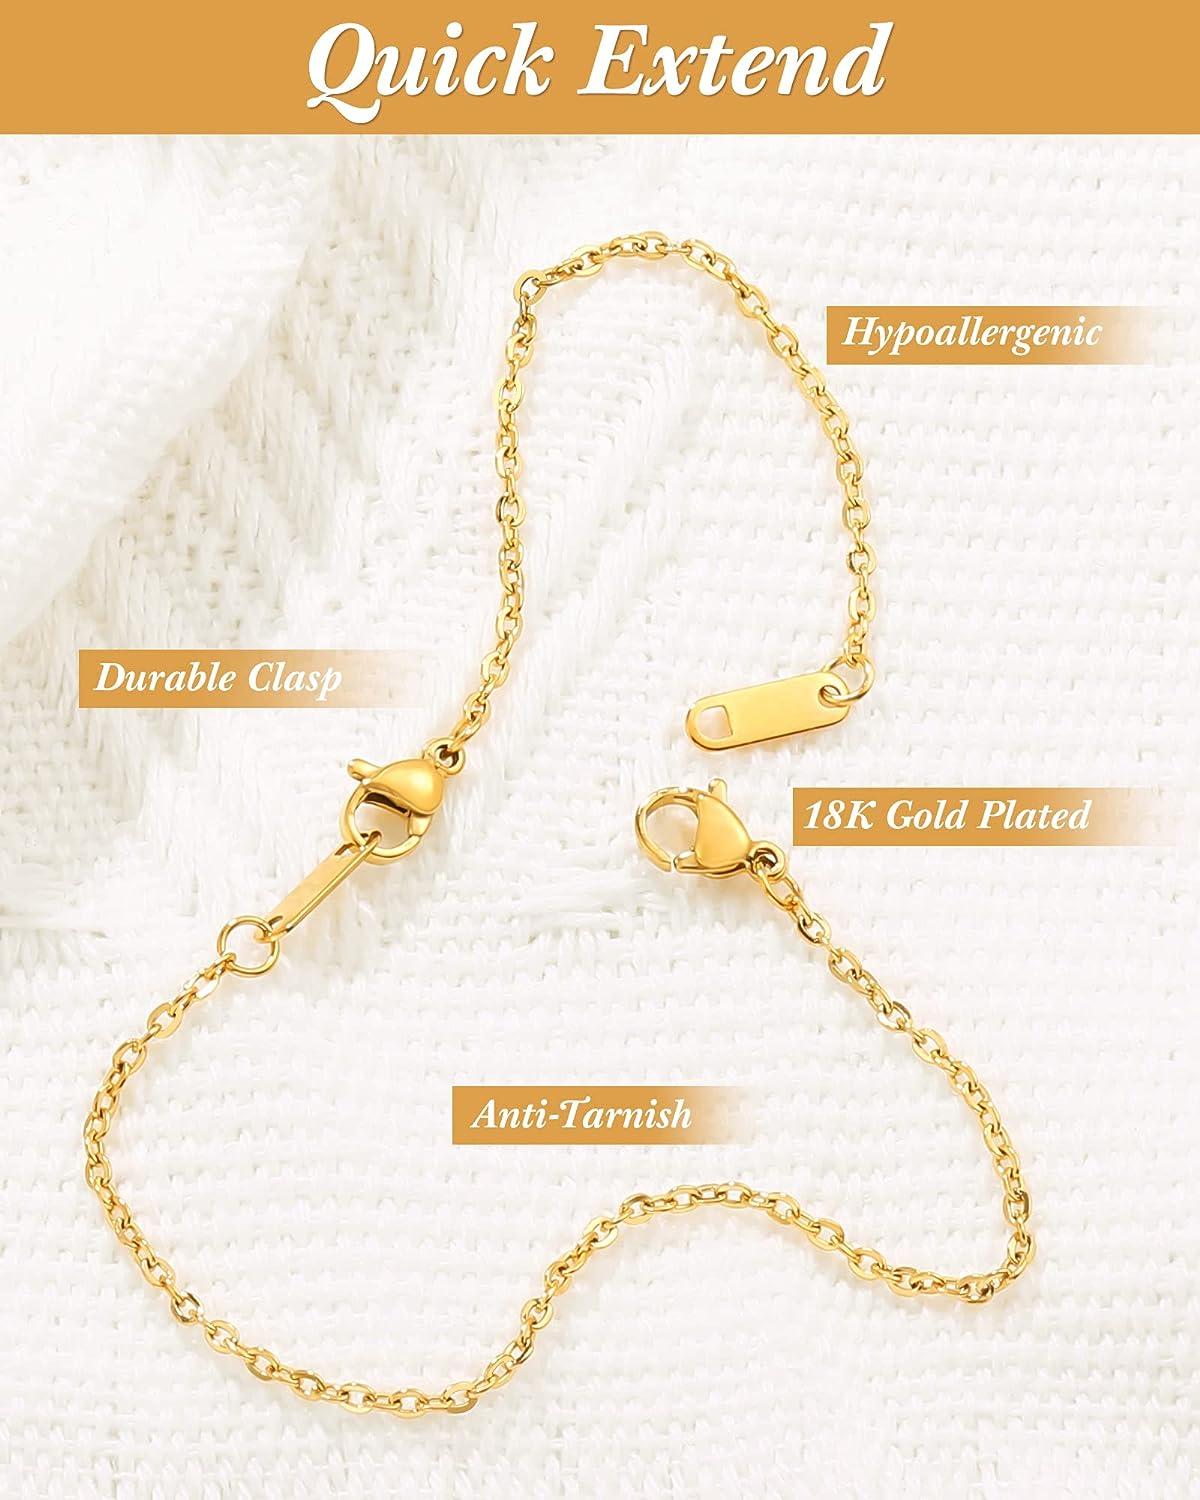 Necklace Extenders, Gold Silver Stainless Steel Chain Extenders